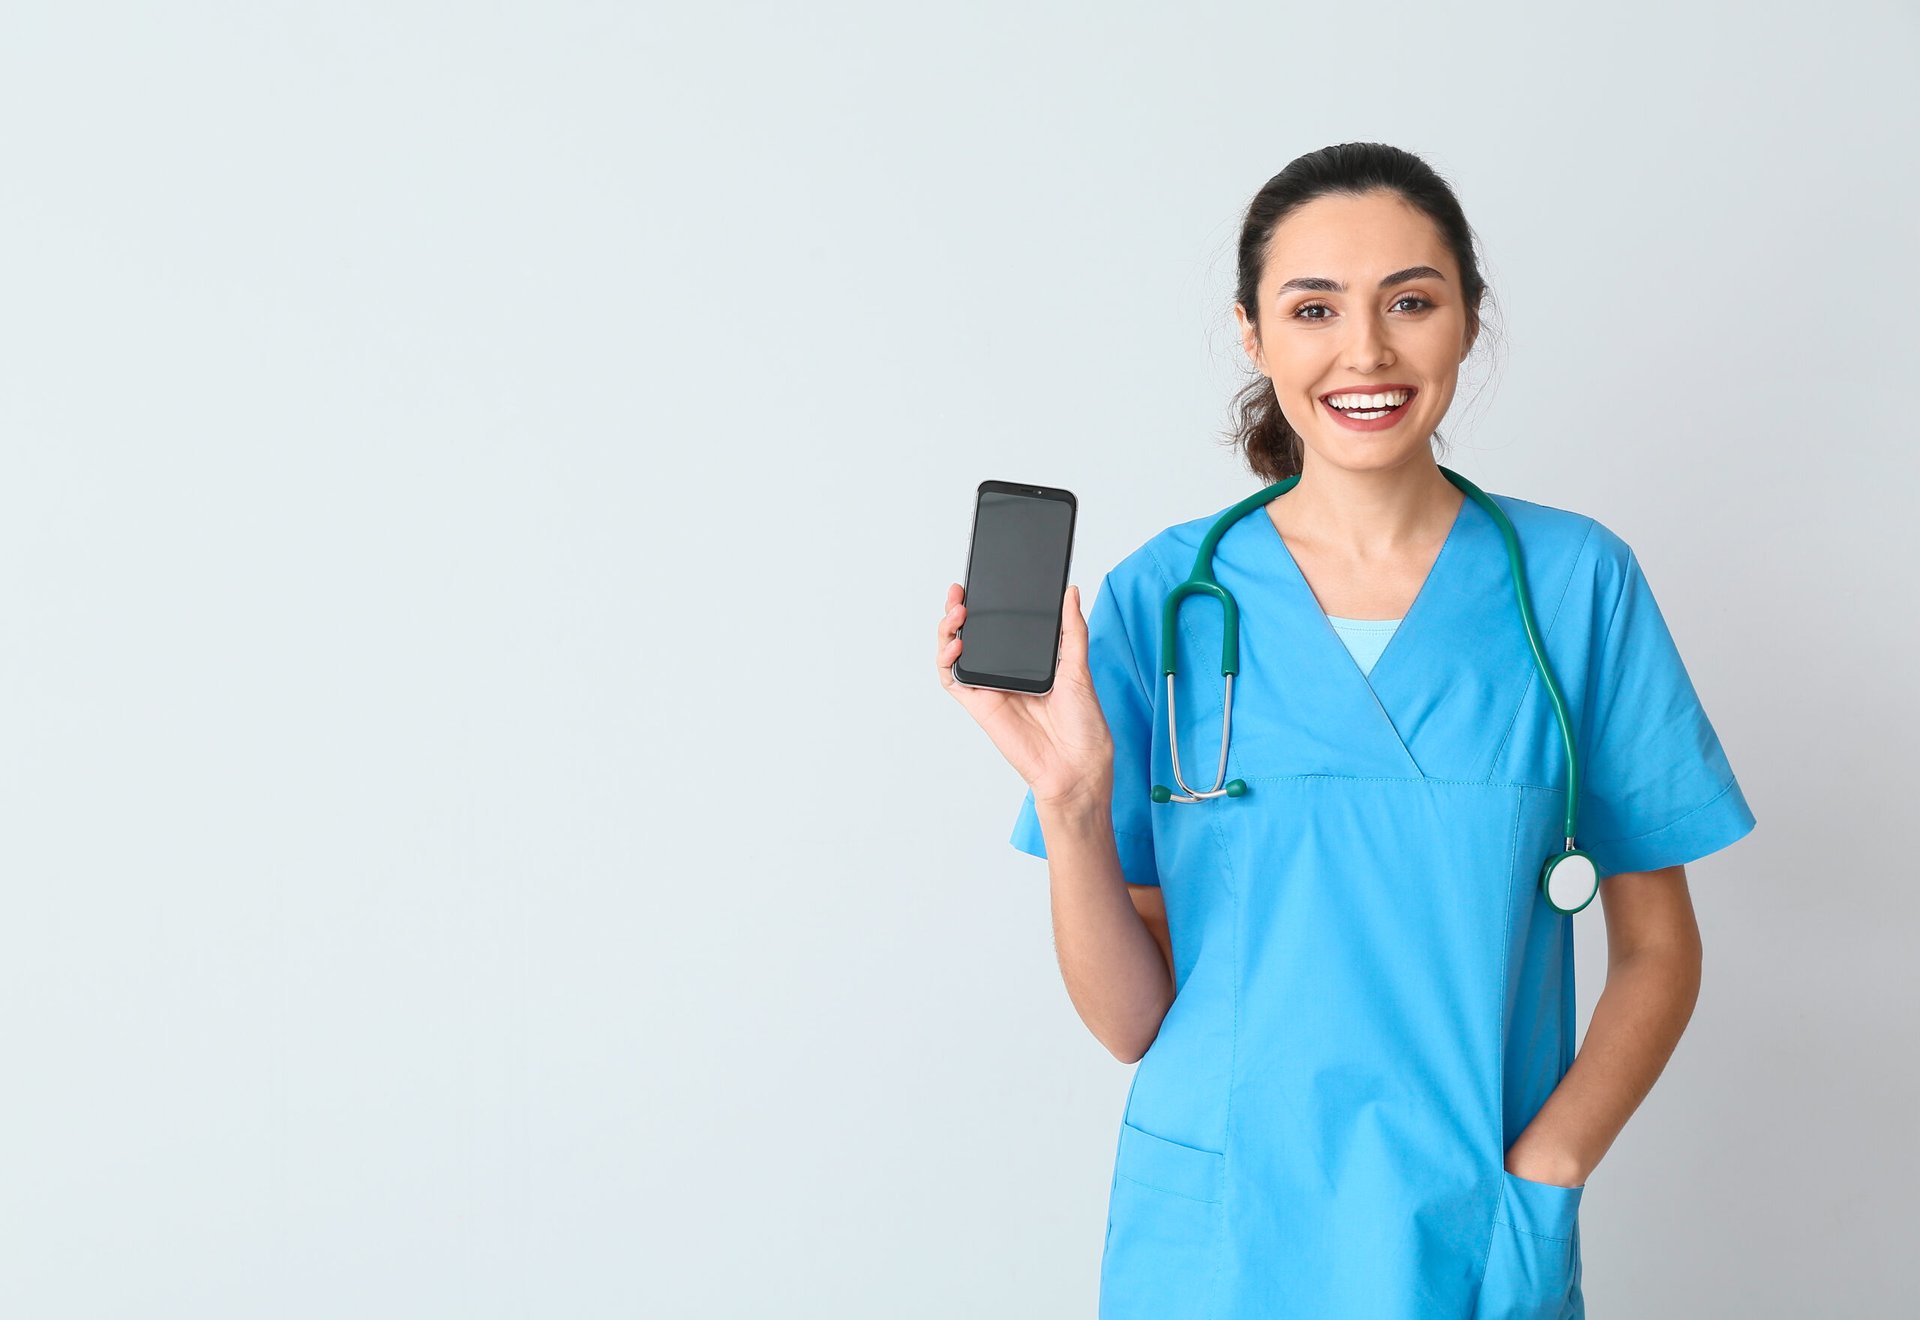 5 Tips for Getting a Remote Nursing Job